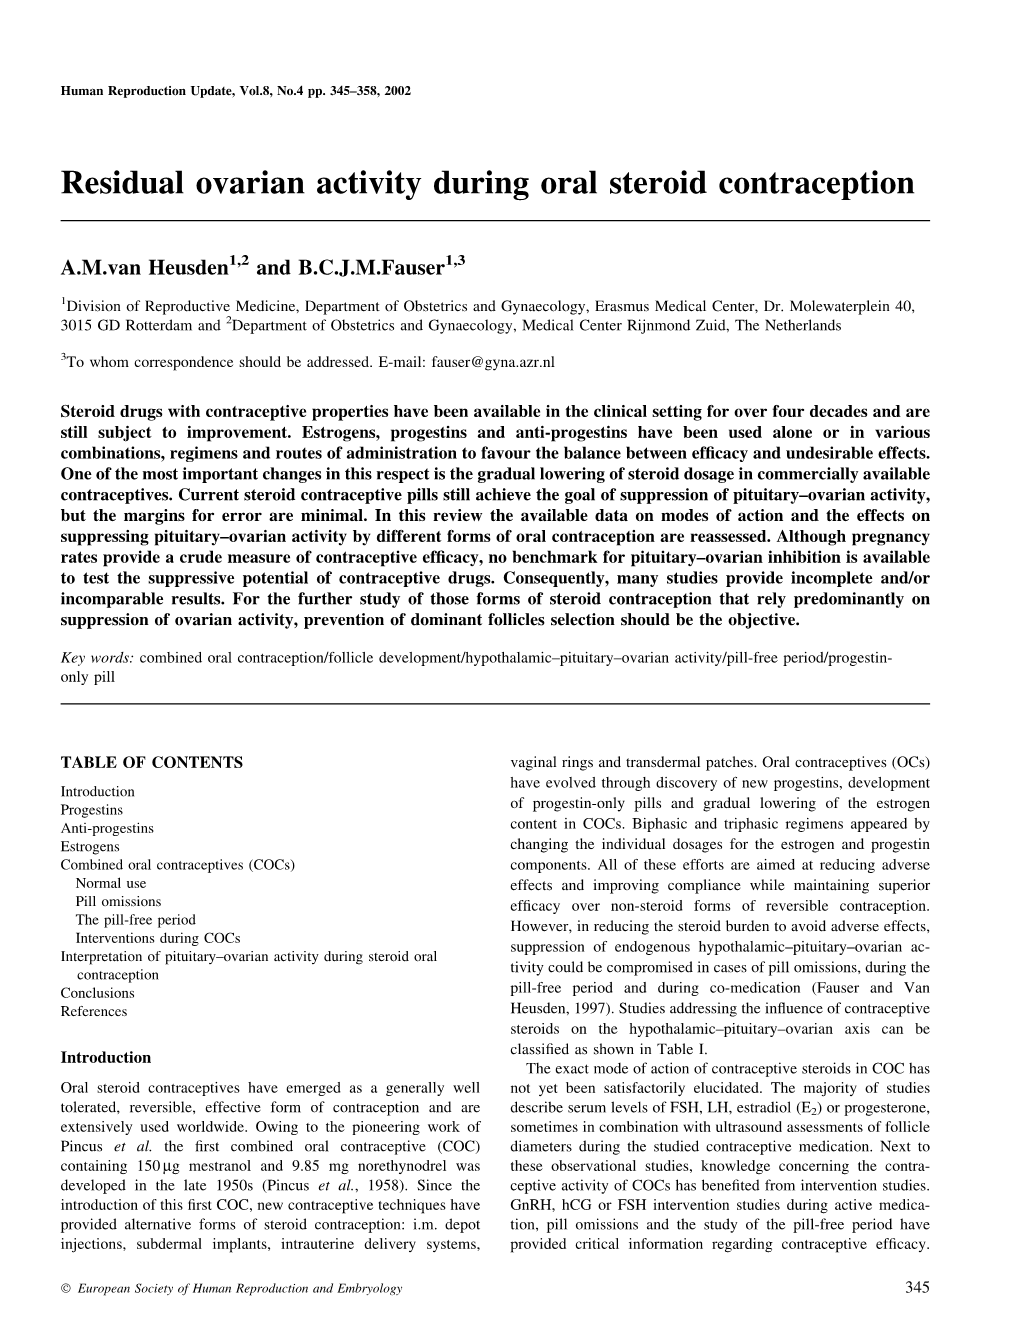 Residual Ovarian Activity During Oral Steroid Contraception